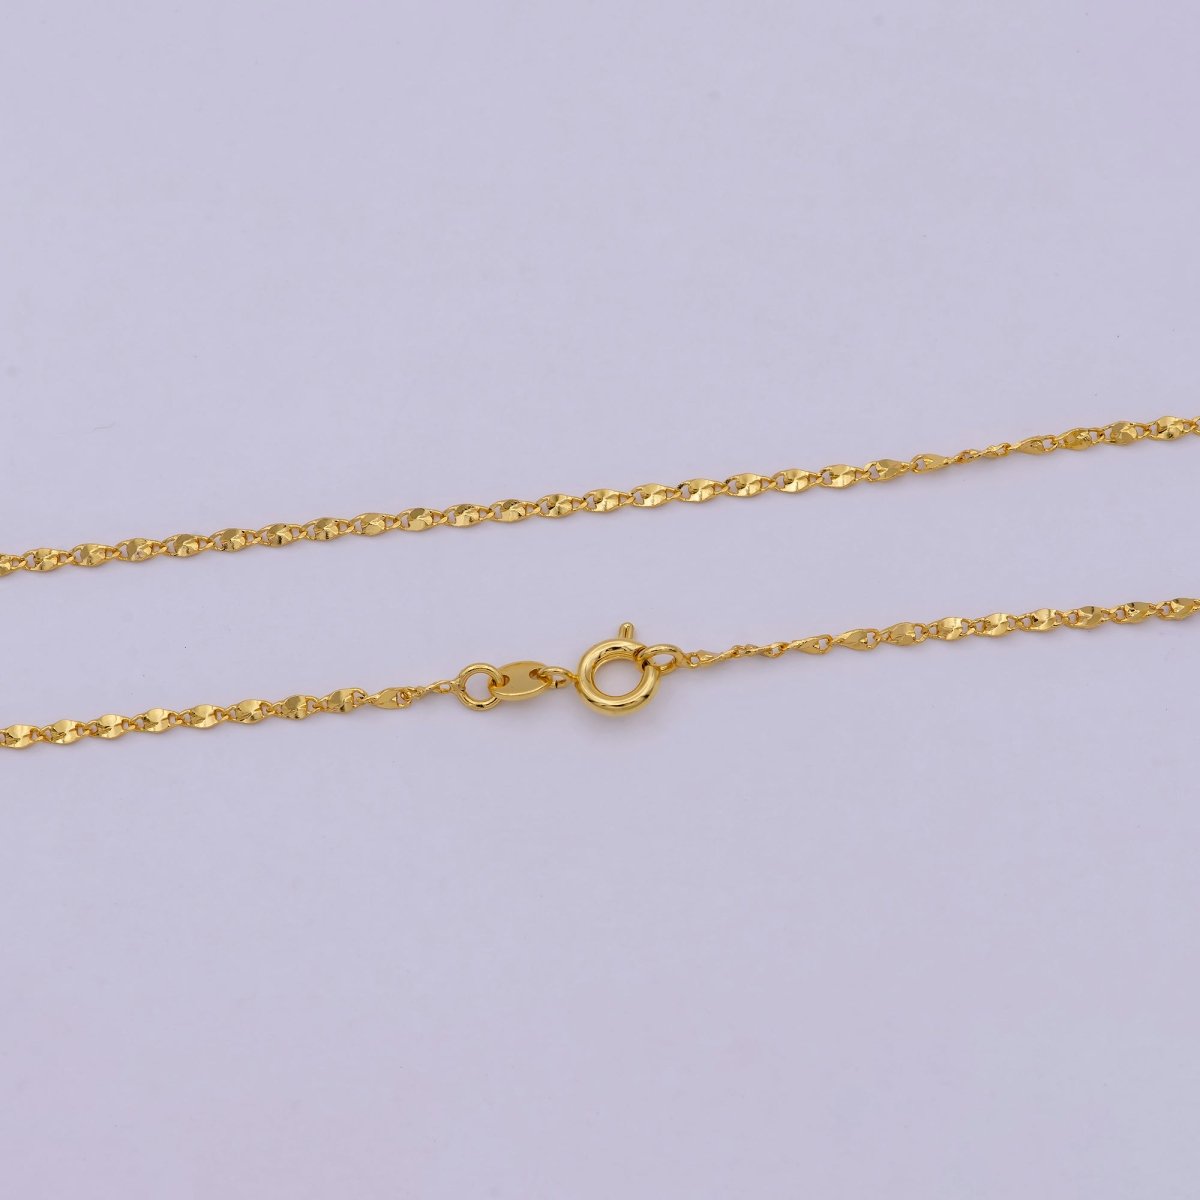 Fancy Link Chain Necklace 18 Inch Ready To wear 24k Gold Filled Chain | WA-537 Clearance Pricing - DLUXCA